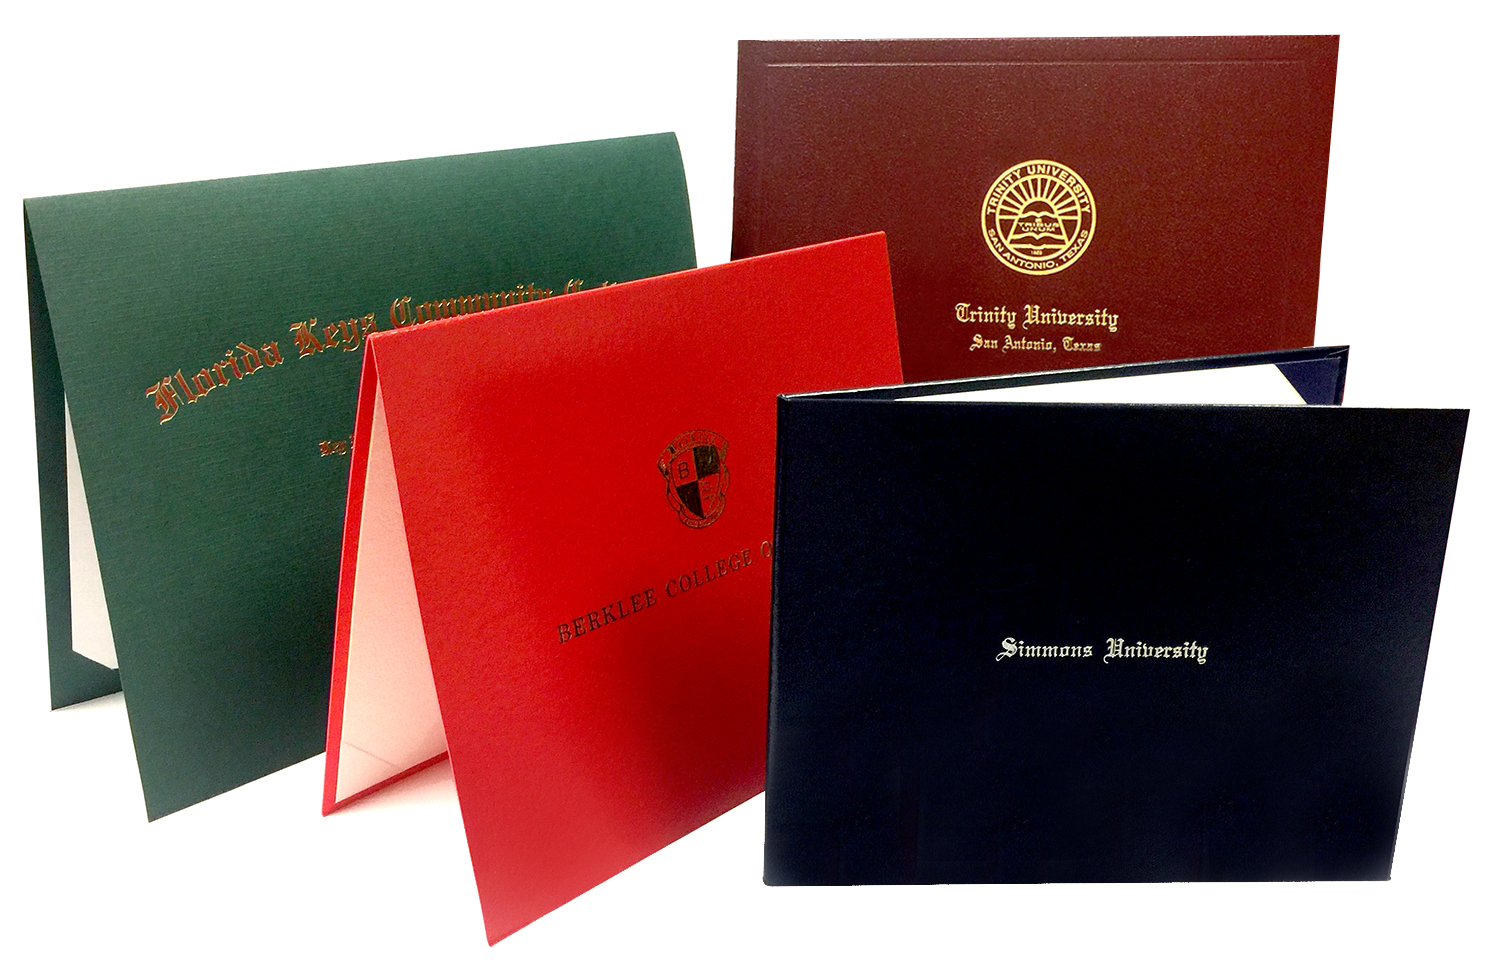 Sample exteriors of Diploma Covers